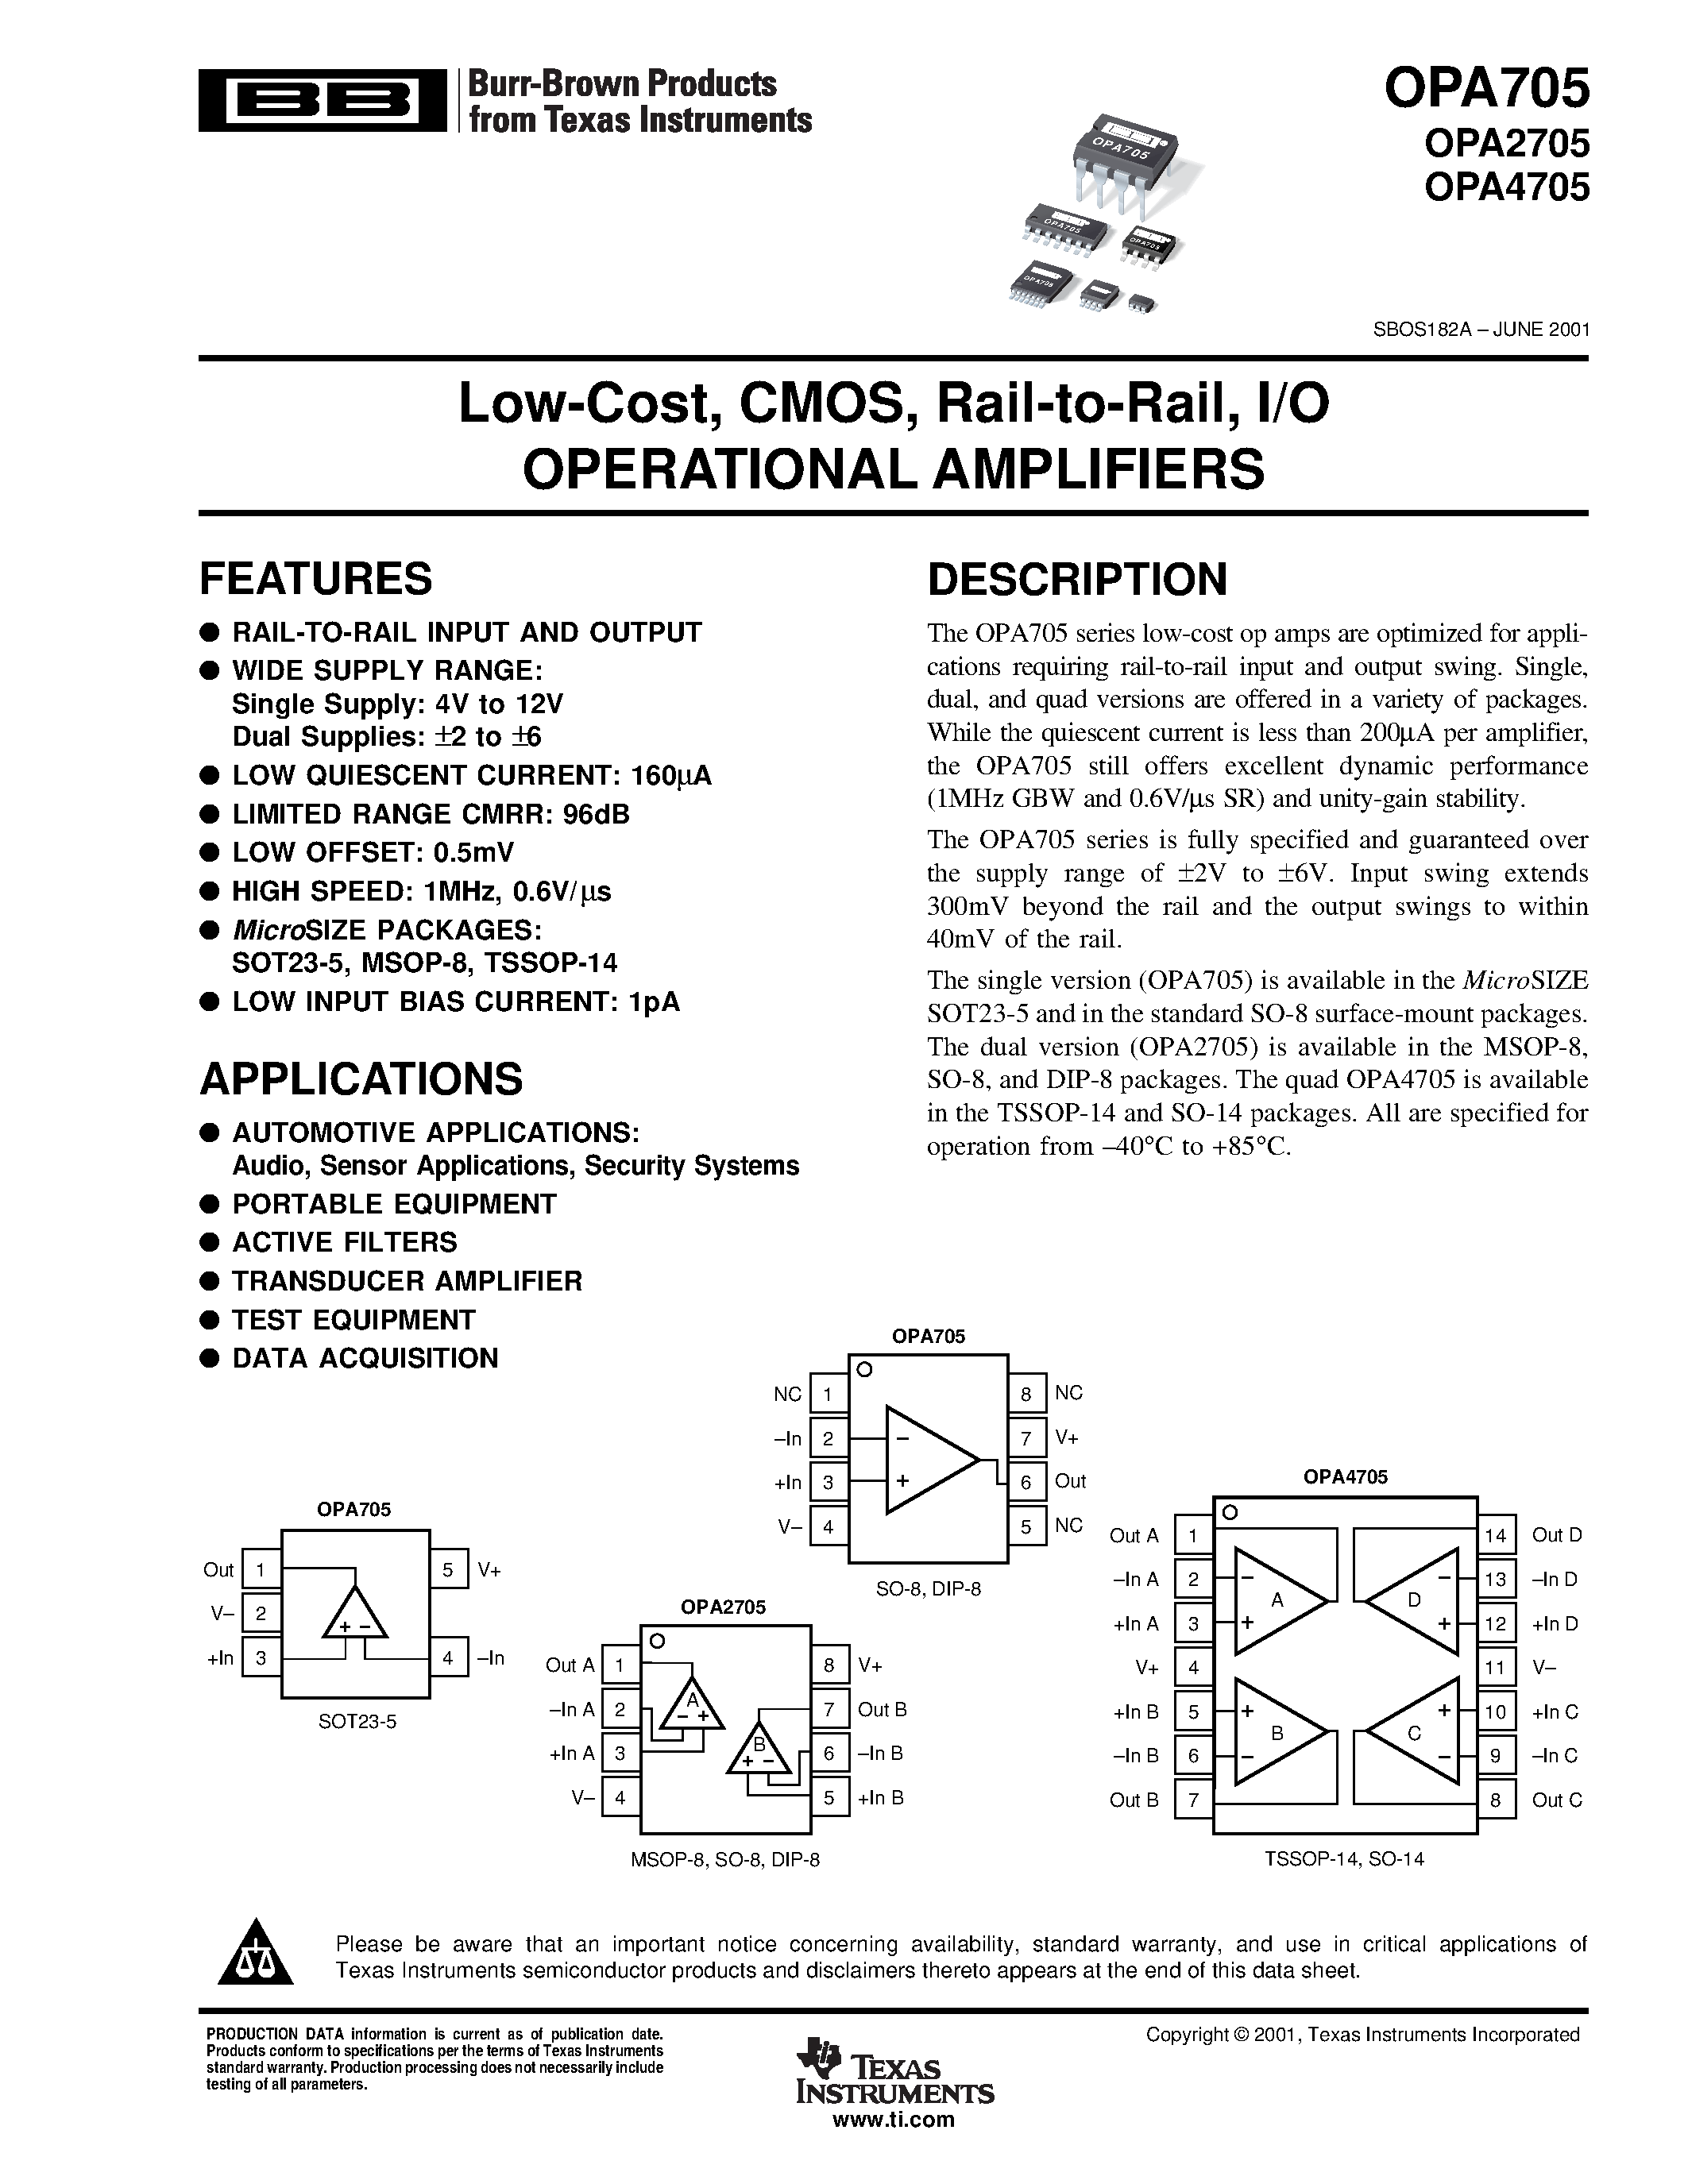 Datasheet OPA2705 - Low-Cost / CMOS / Rail-to-Rail / I/O OPERATIONAL AMPLIFIERS page 1